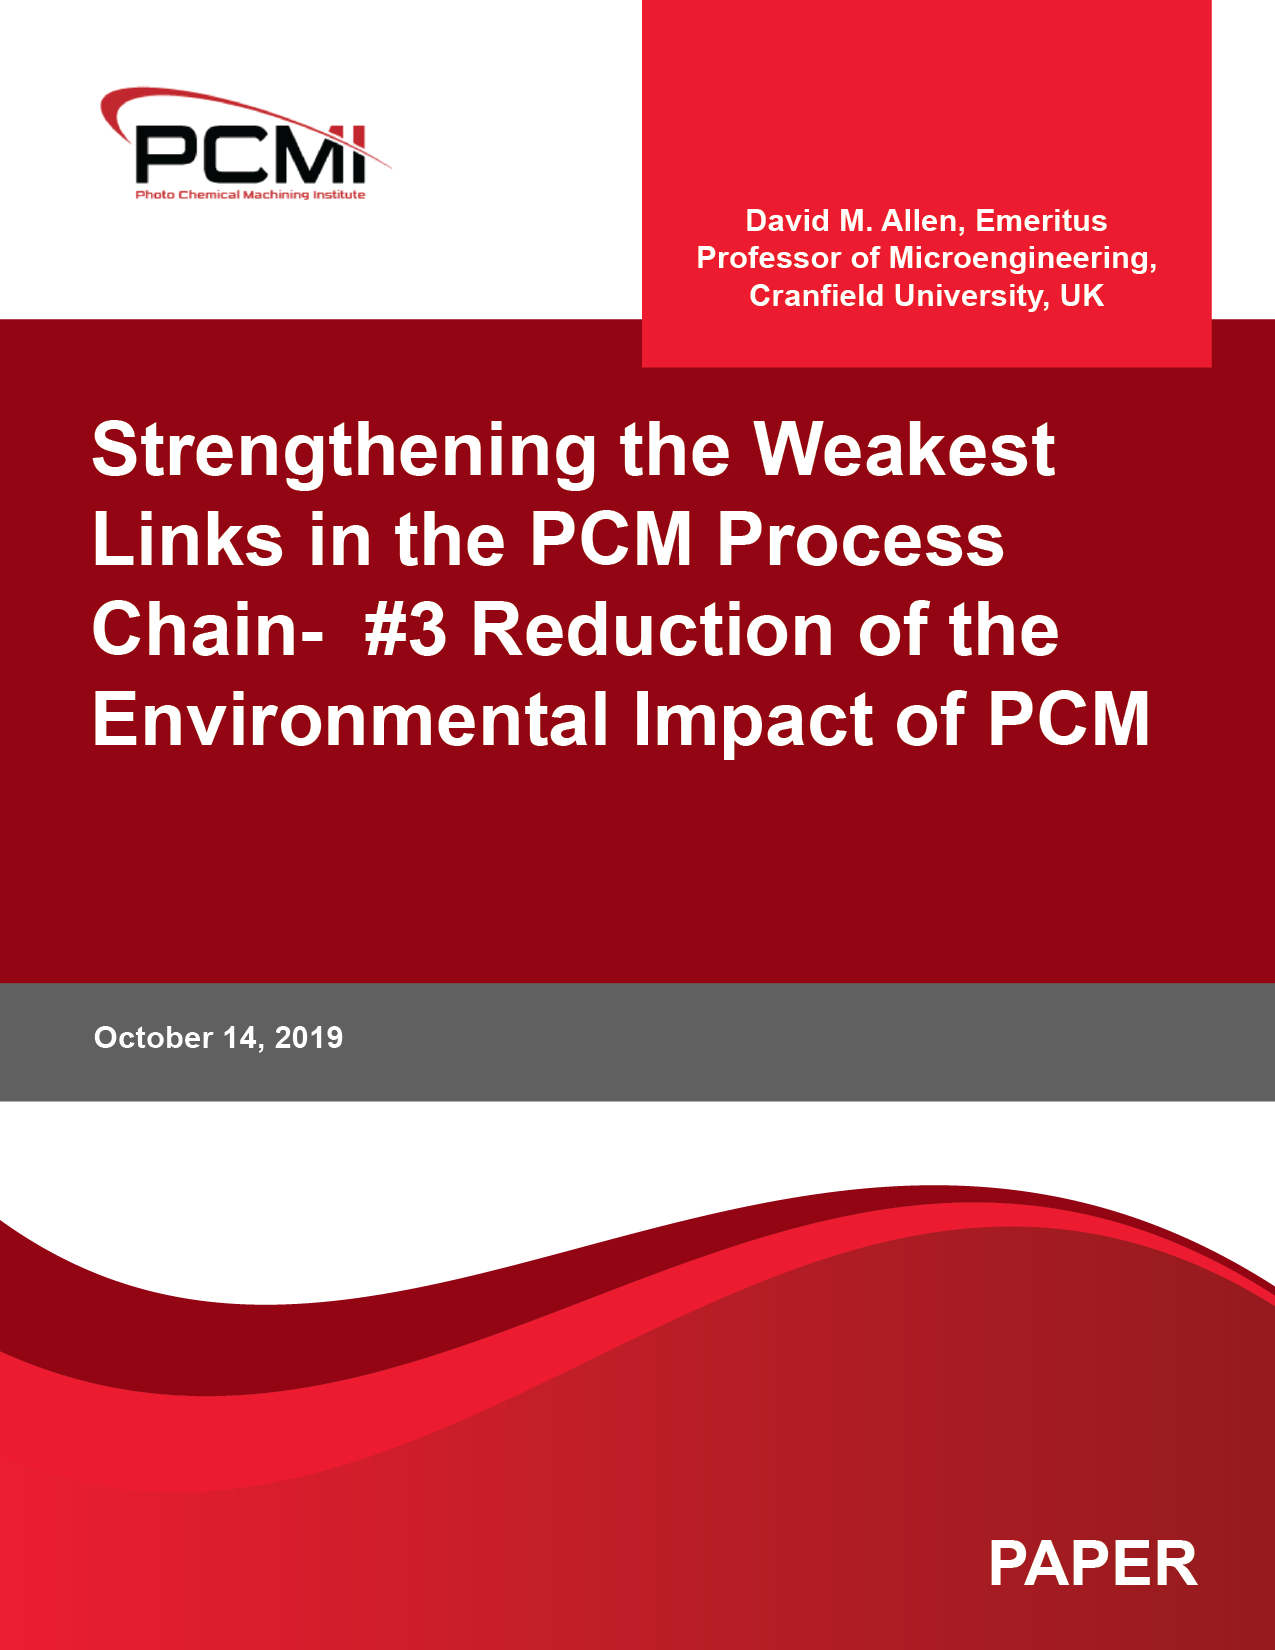 Strengthening the Weakest Links in the PCM Process Chain-  #3 Reduction of the Environmental Impact of PCM